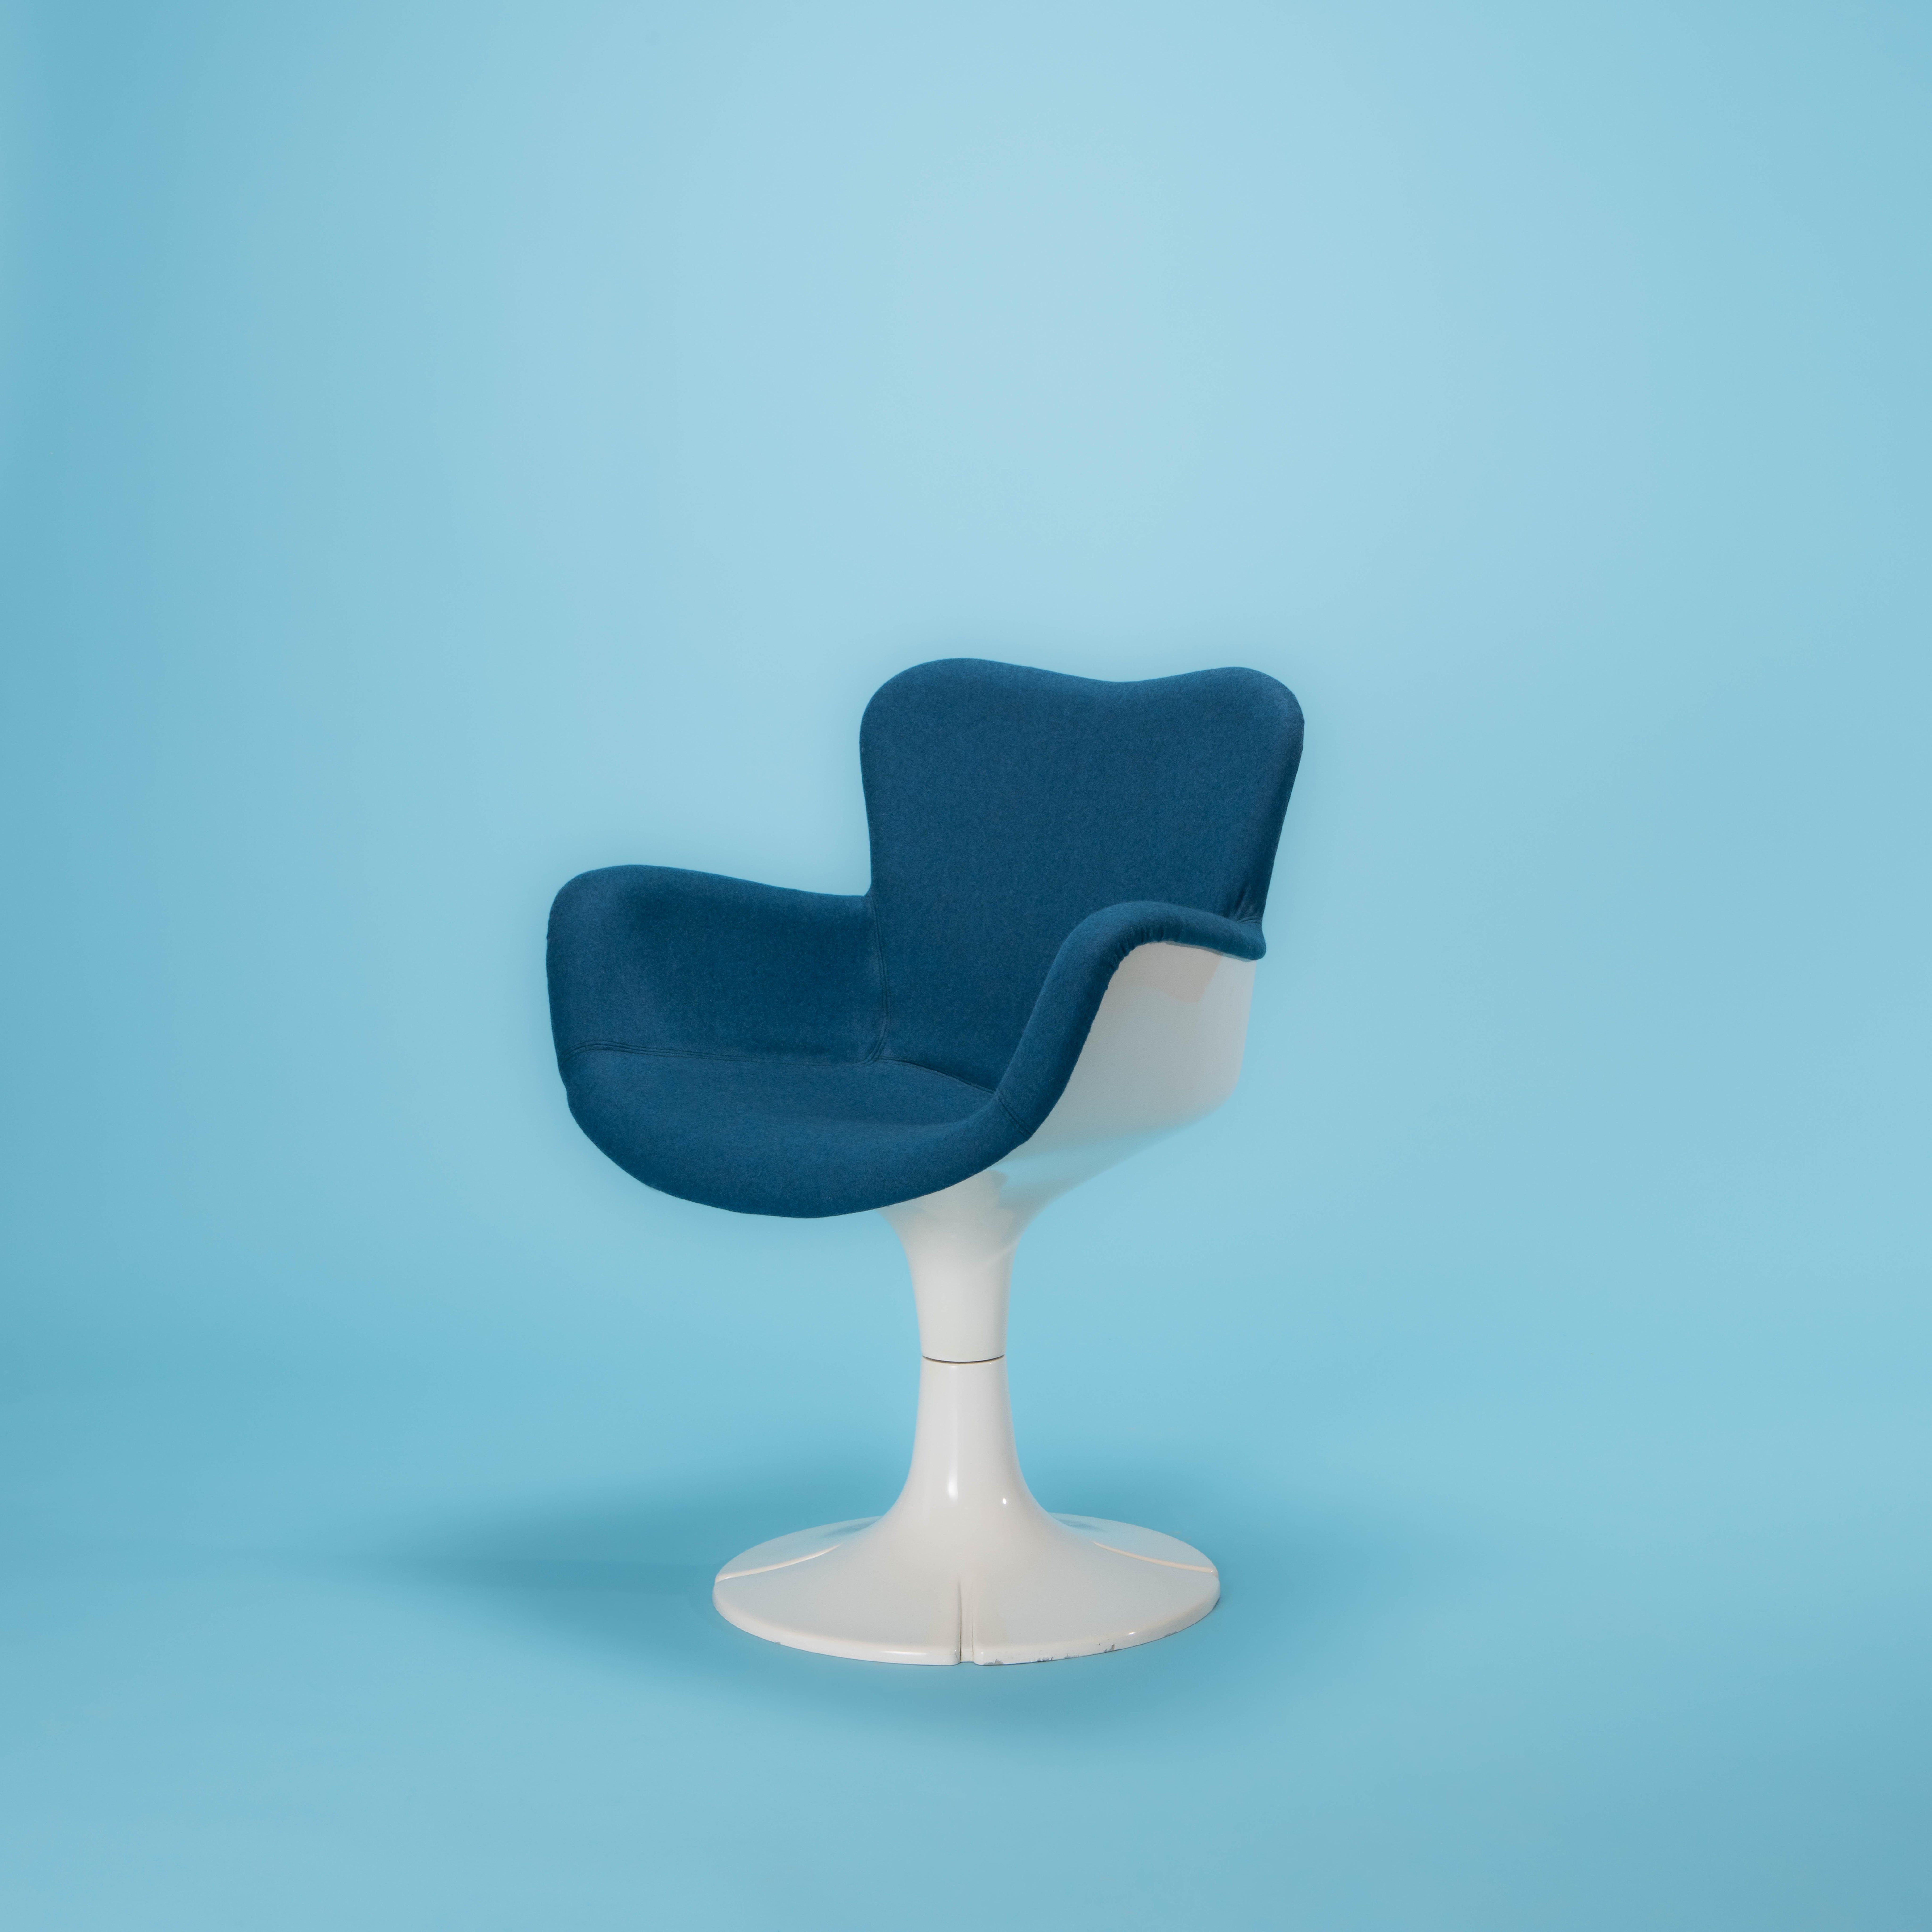 Christian Adam (1938-)
Set of four Trèfle chairs
Airborne edition, circa 1968
White polyester gelcoat, foam and blue fabric Maison Kvadrat
W. 50 x H. 77x D. 50 cm

Literature :
L'Œil, May 1970